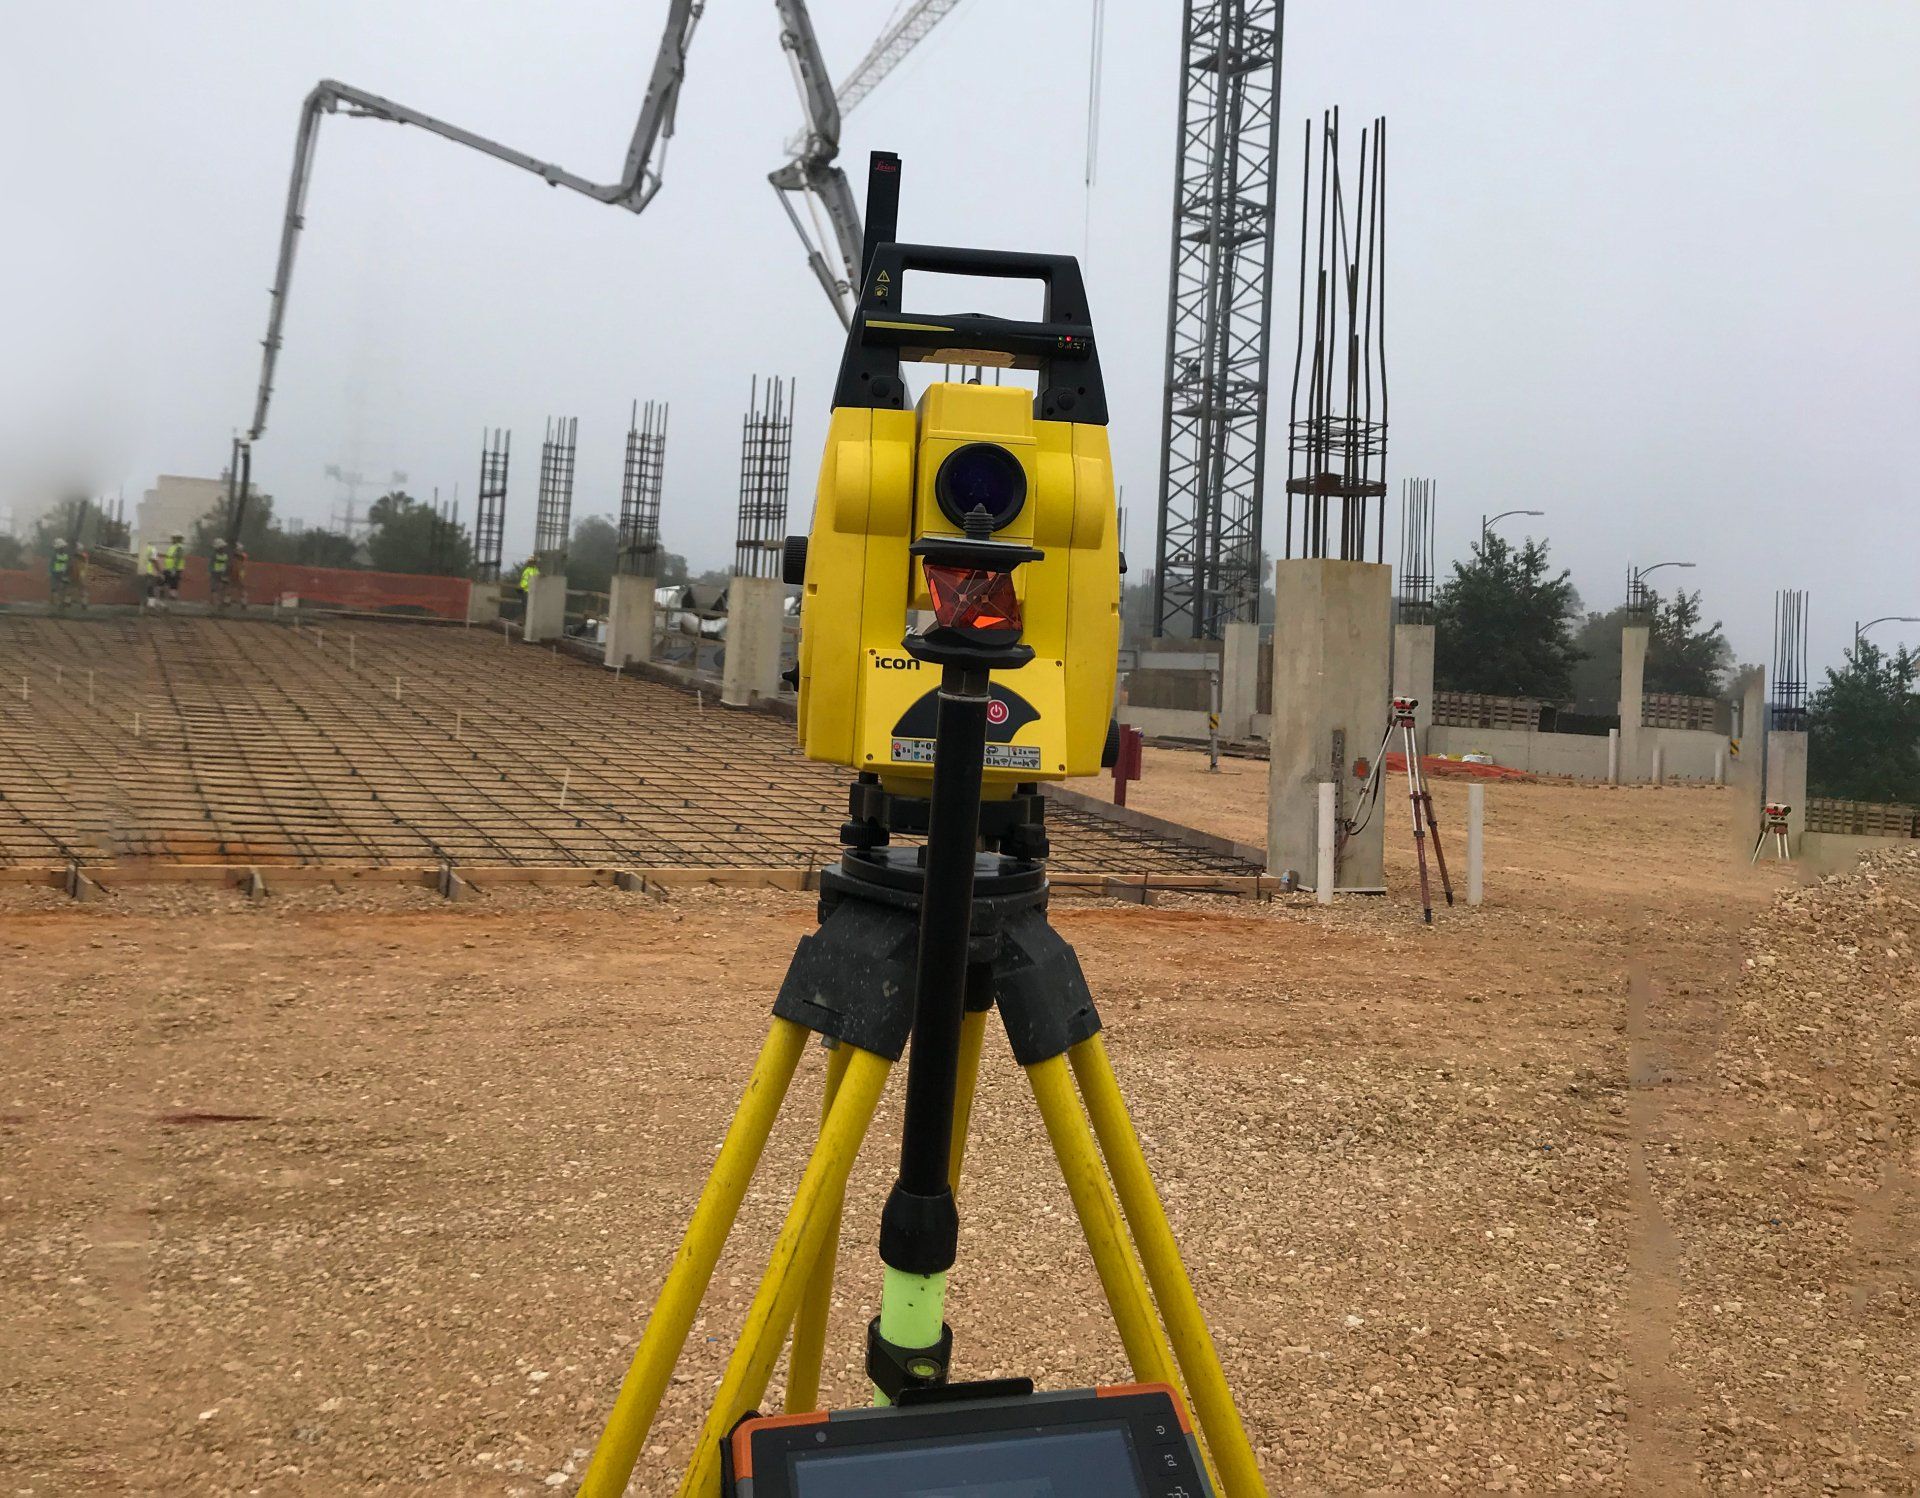 A construction site with a yellow camera on a tripod